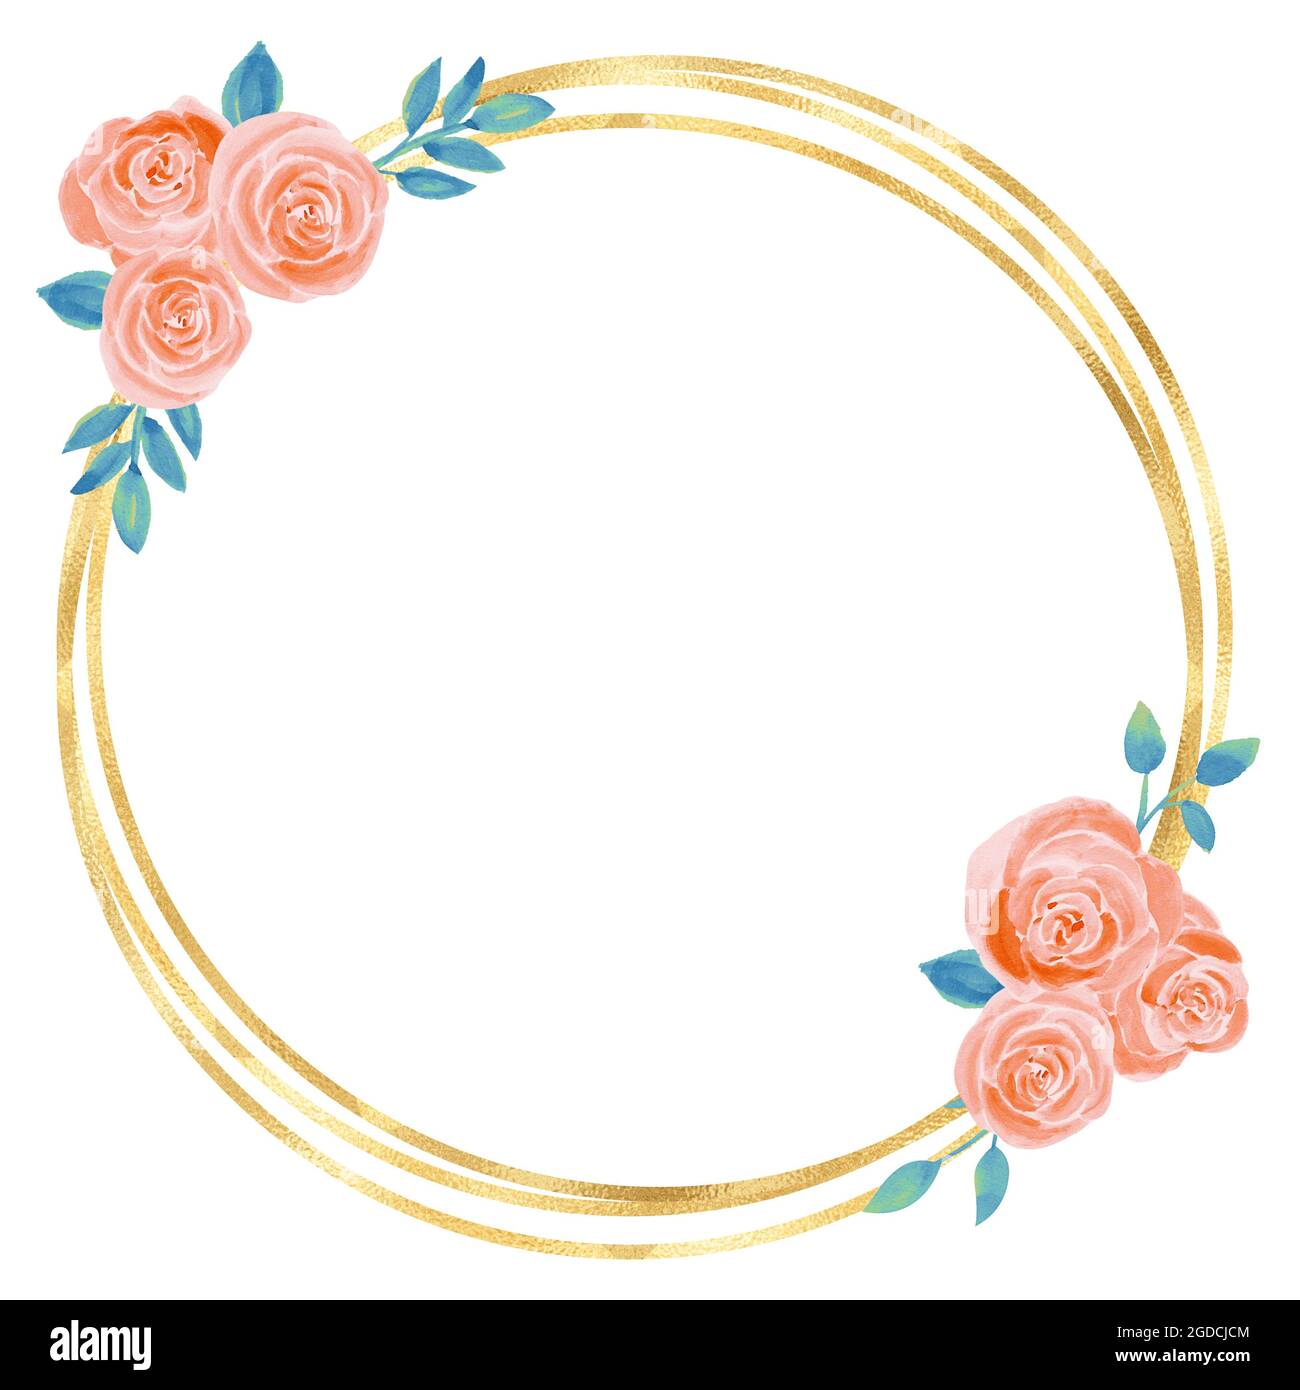 Gold circle frame with watercolor flower. Golden geometric border with  peach roses and navy blue branches clipart Stock Photo - Alamy